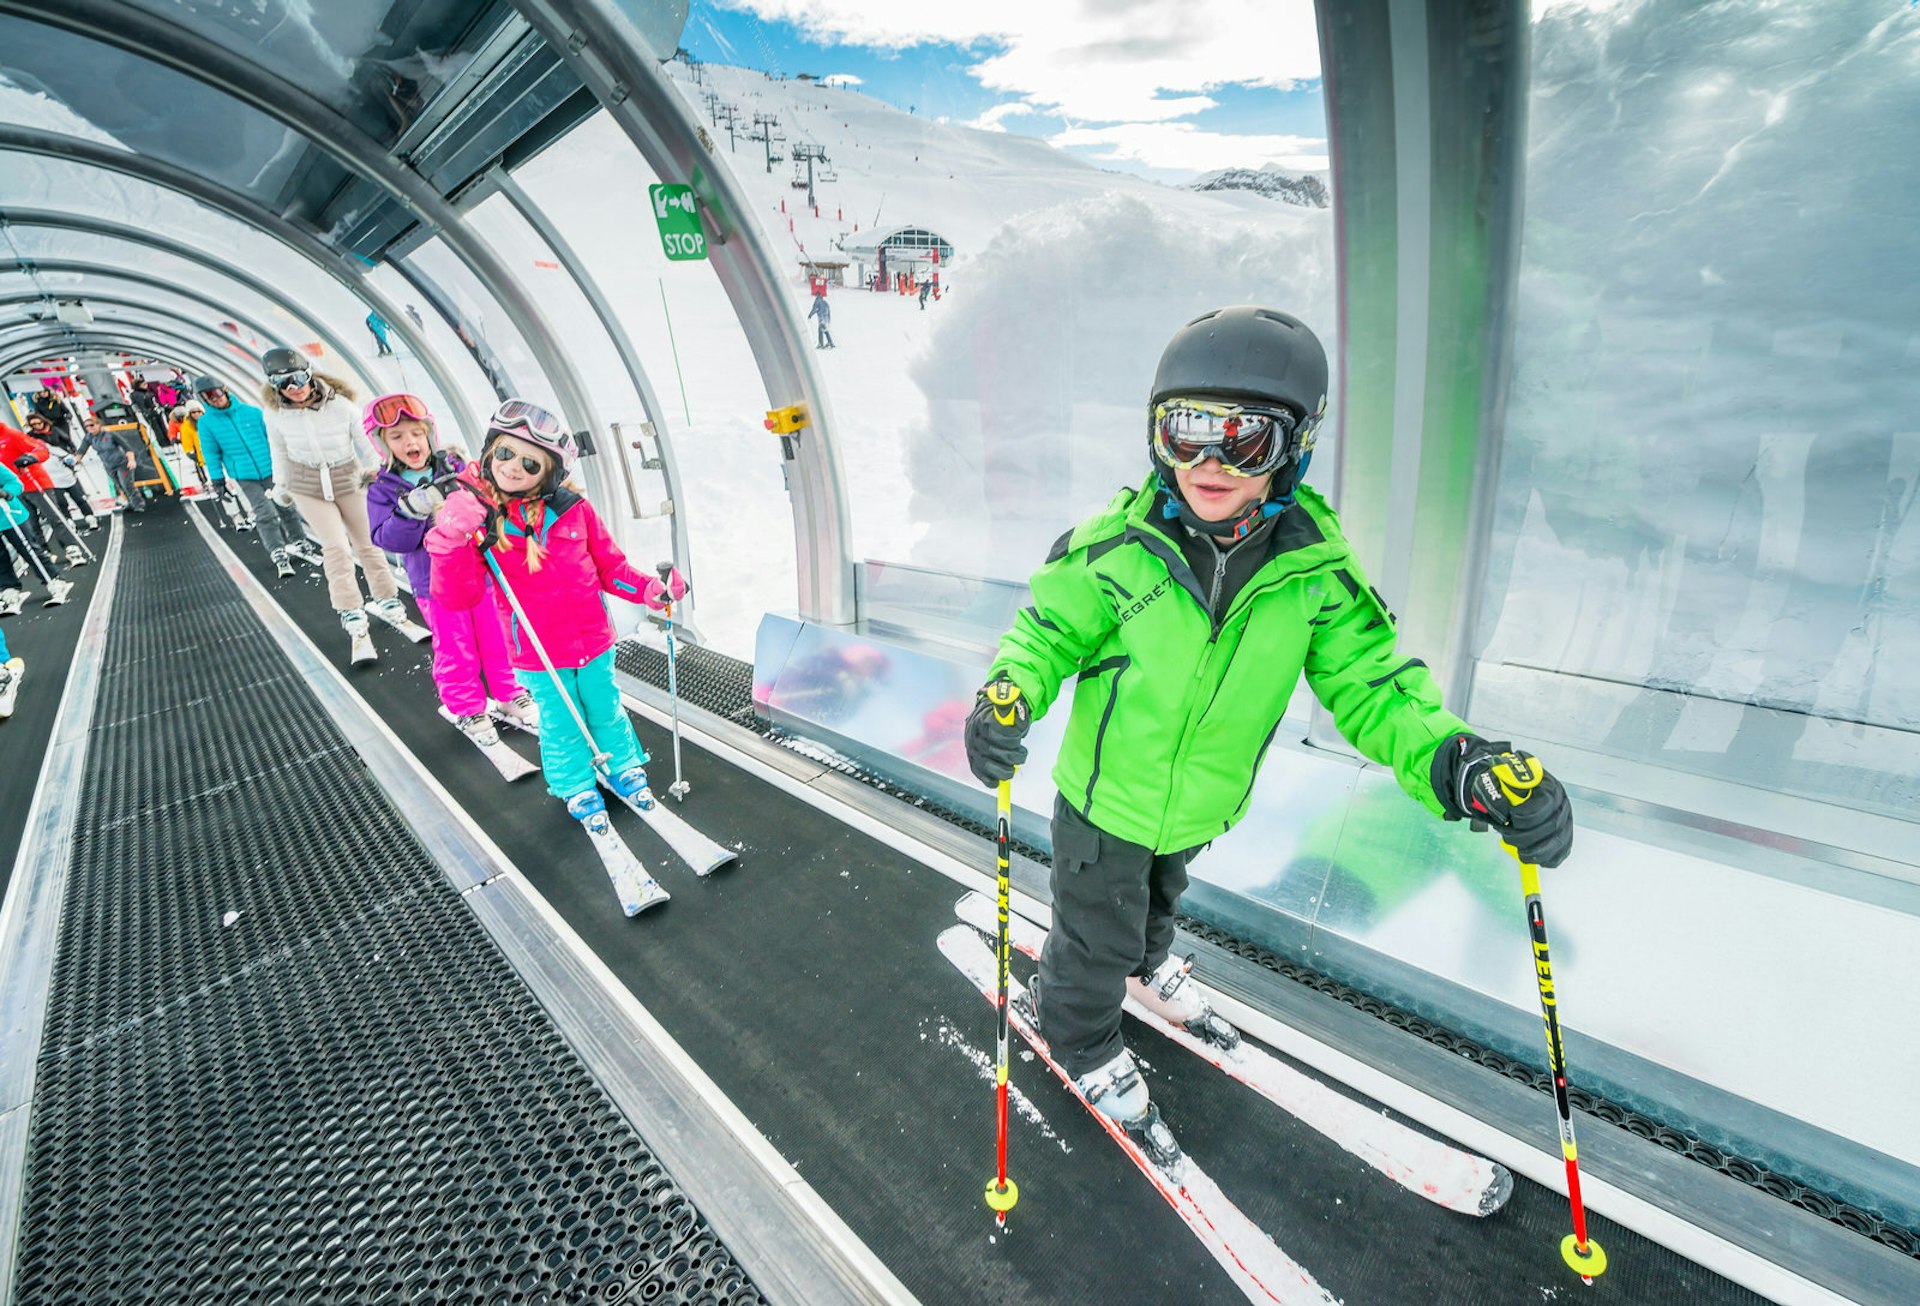 Children ride up one of the magic carpet lifts in Solaise © Val d'Isère